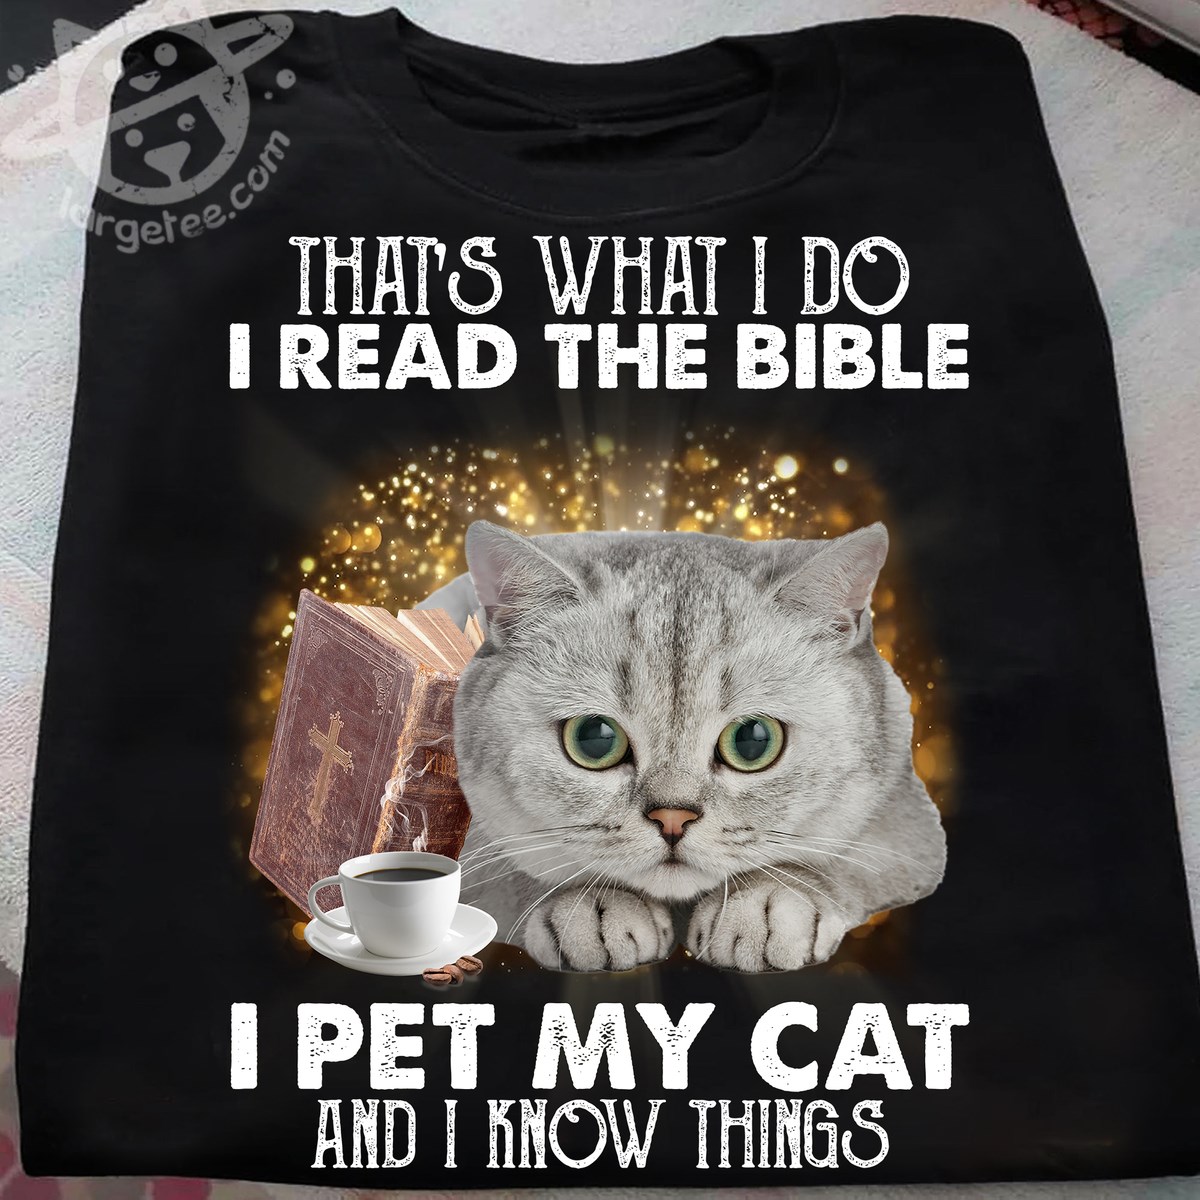 That's what I do I read the bible I pet my cat and I know things - Book lover